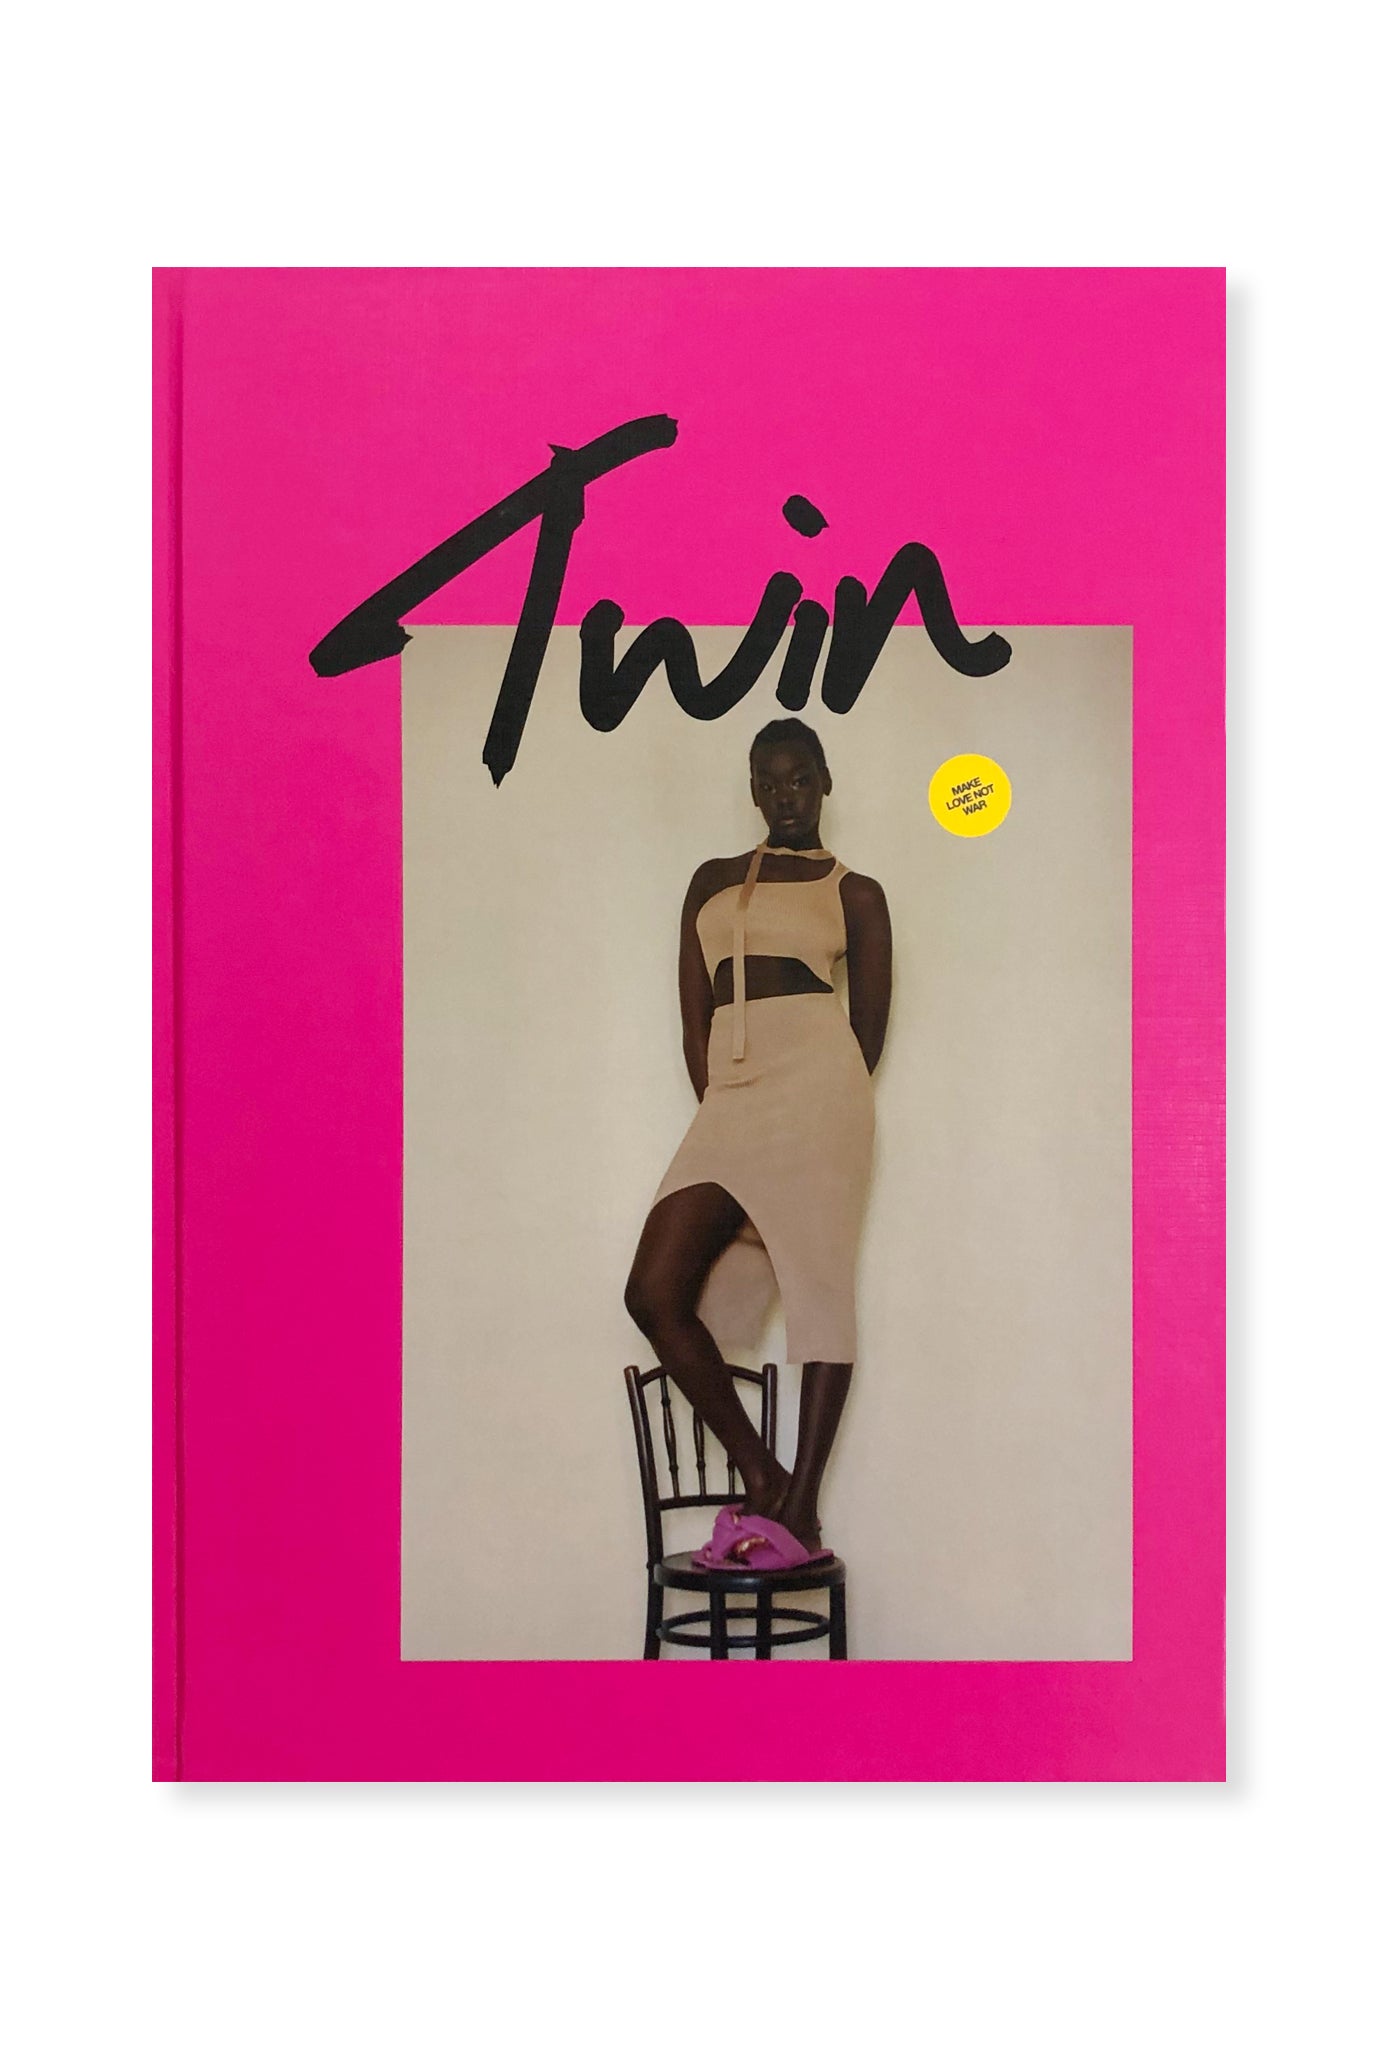 Twin, Issue 26